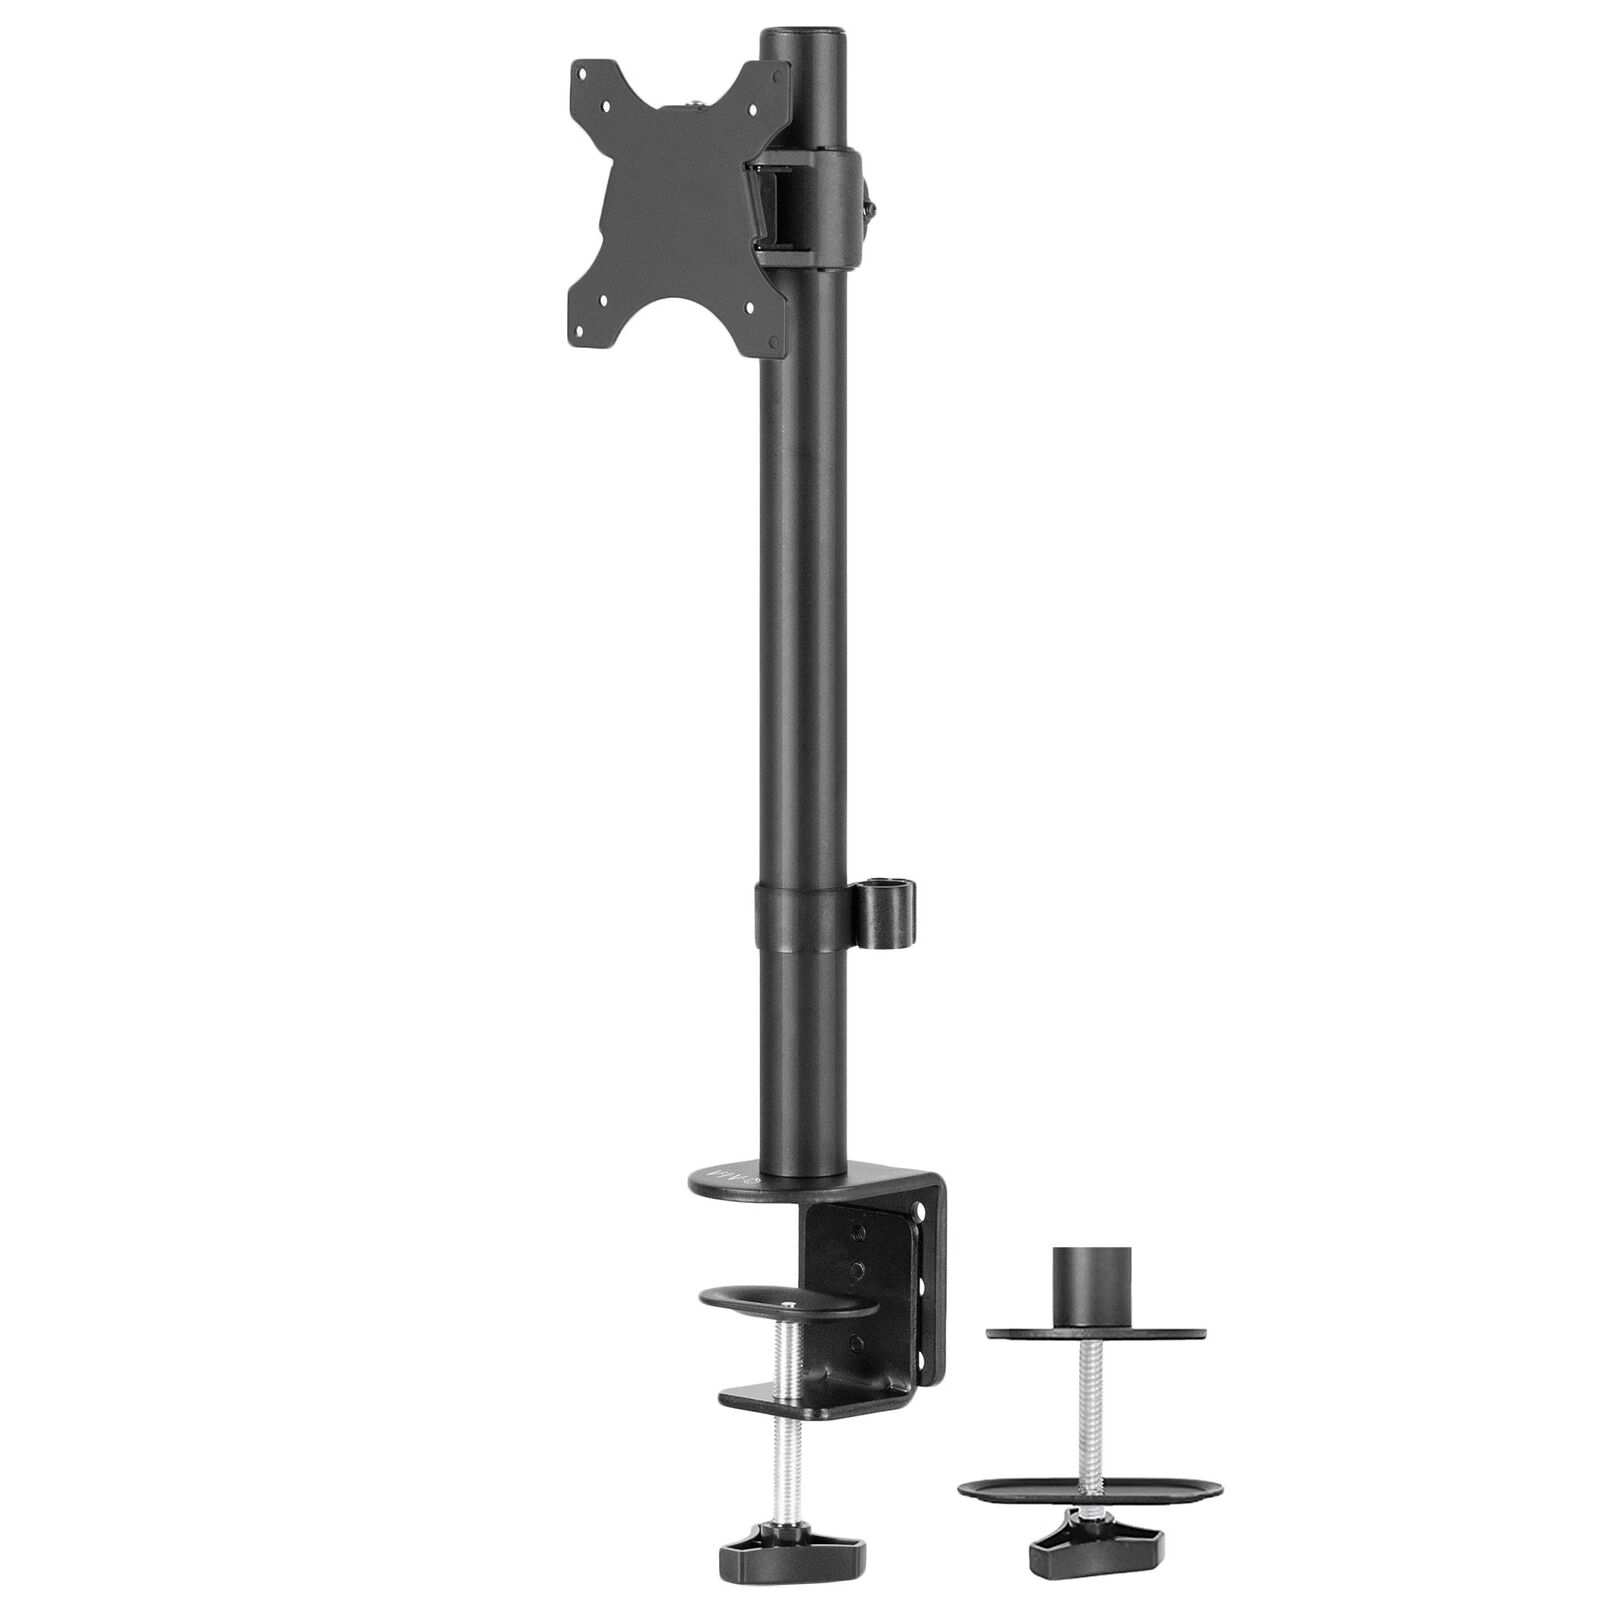 VIVO Single Ultrawide Monitor Fully Adjustable Desk Mount Stand for 1 LCD